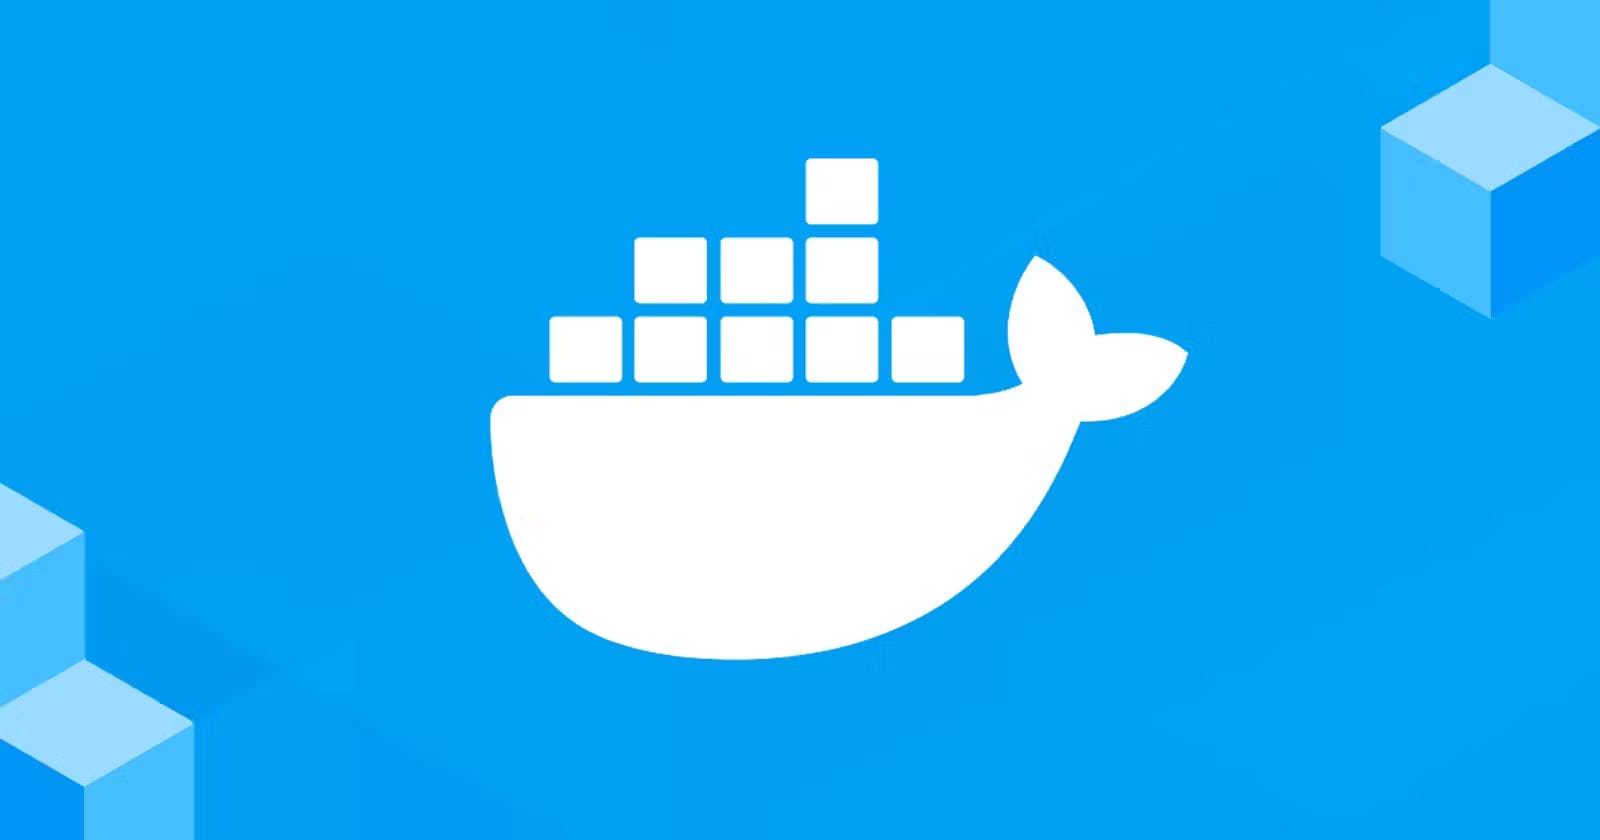 Diving with the Whale V - Docker Compose and Multi-Container Apps